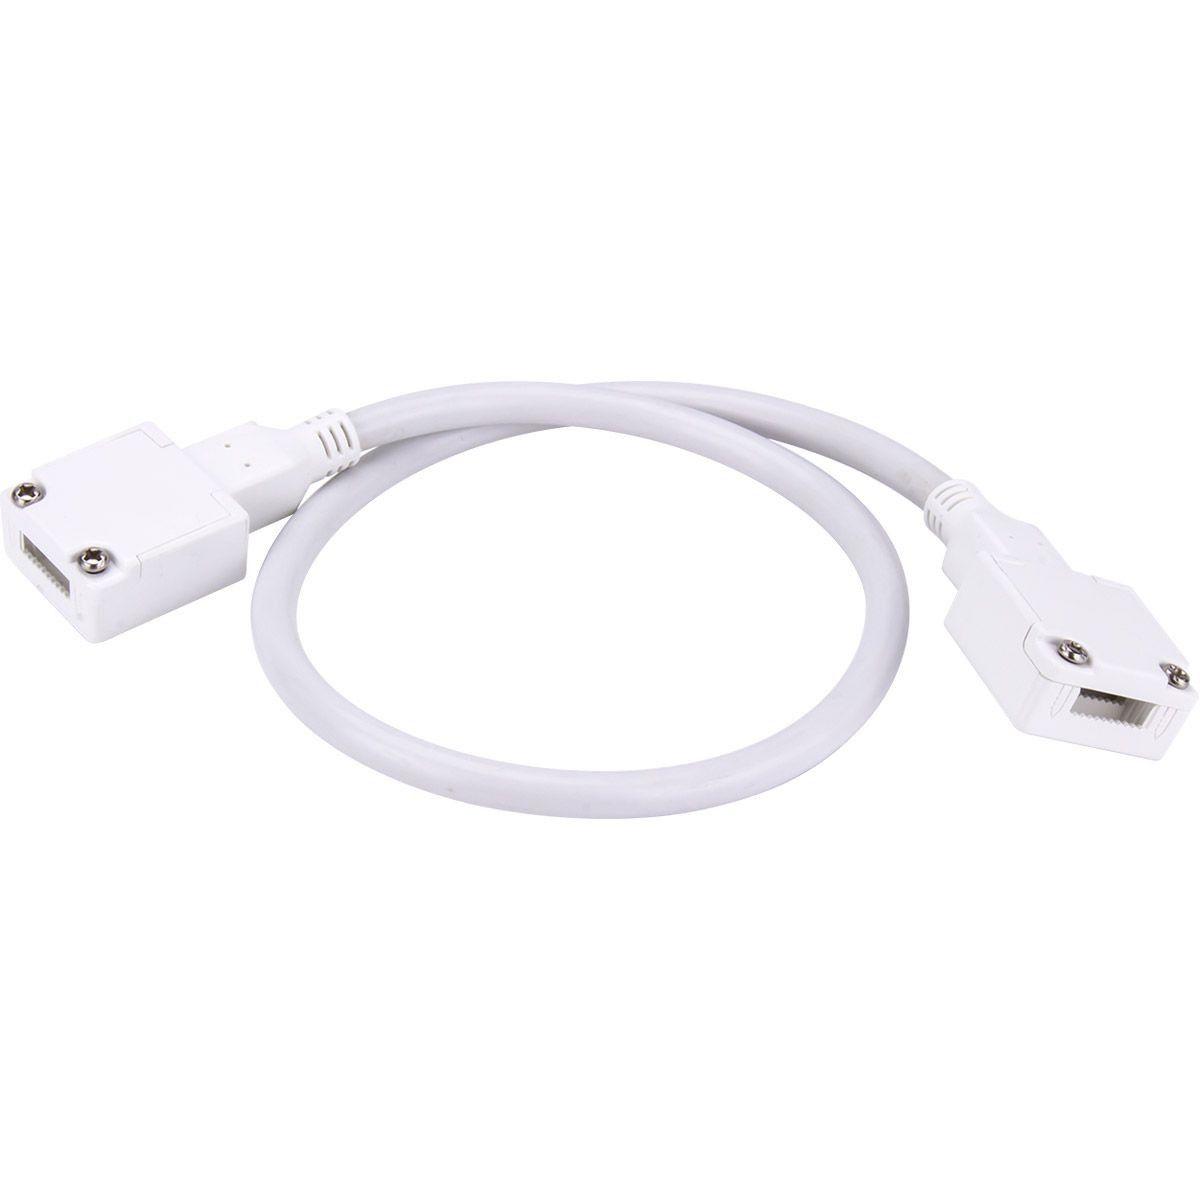 Hybrid 3 6in. Linking Cable